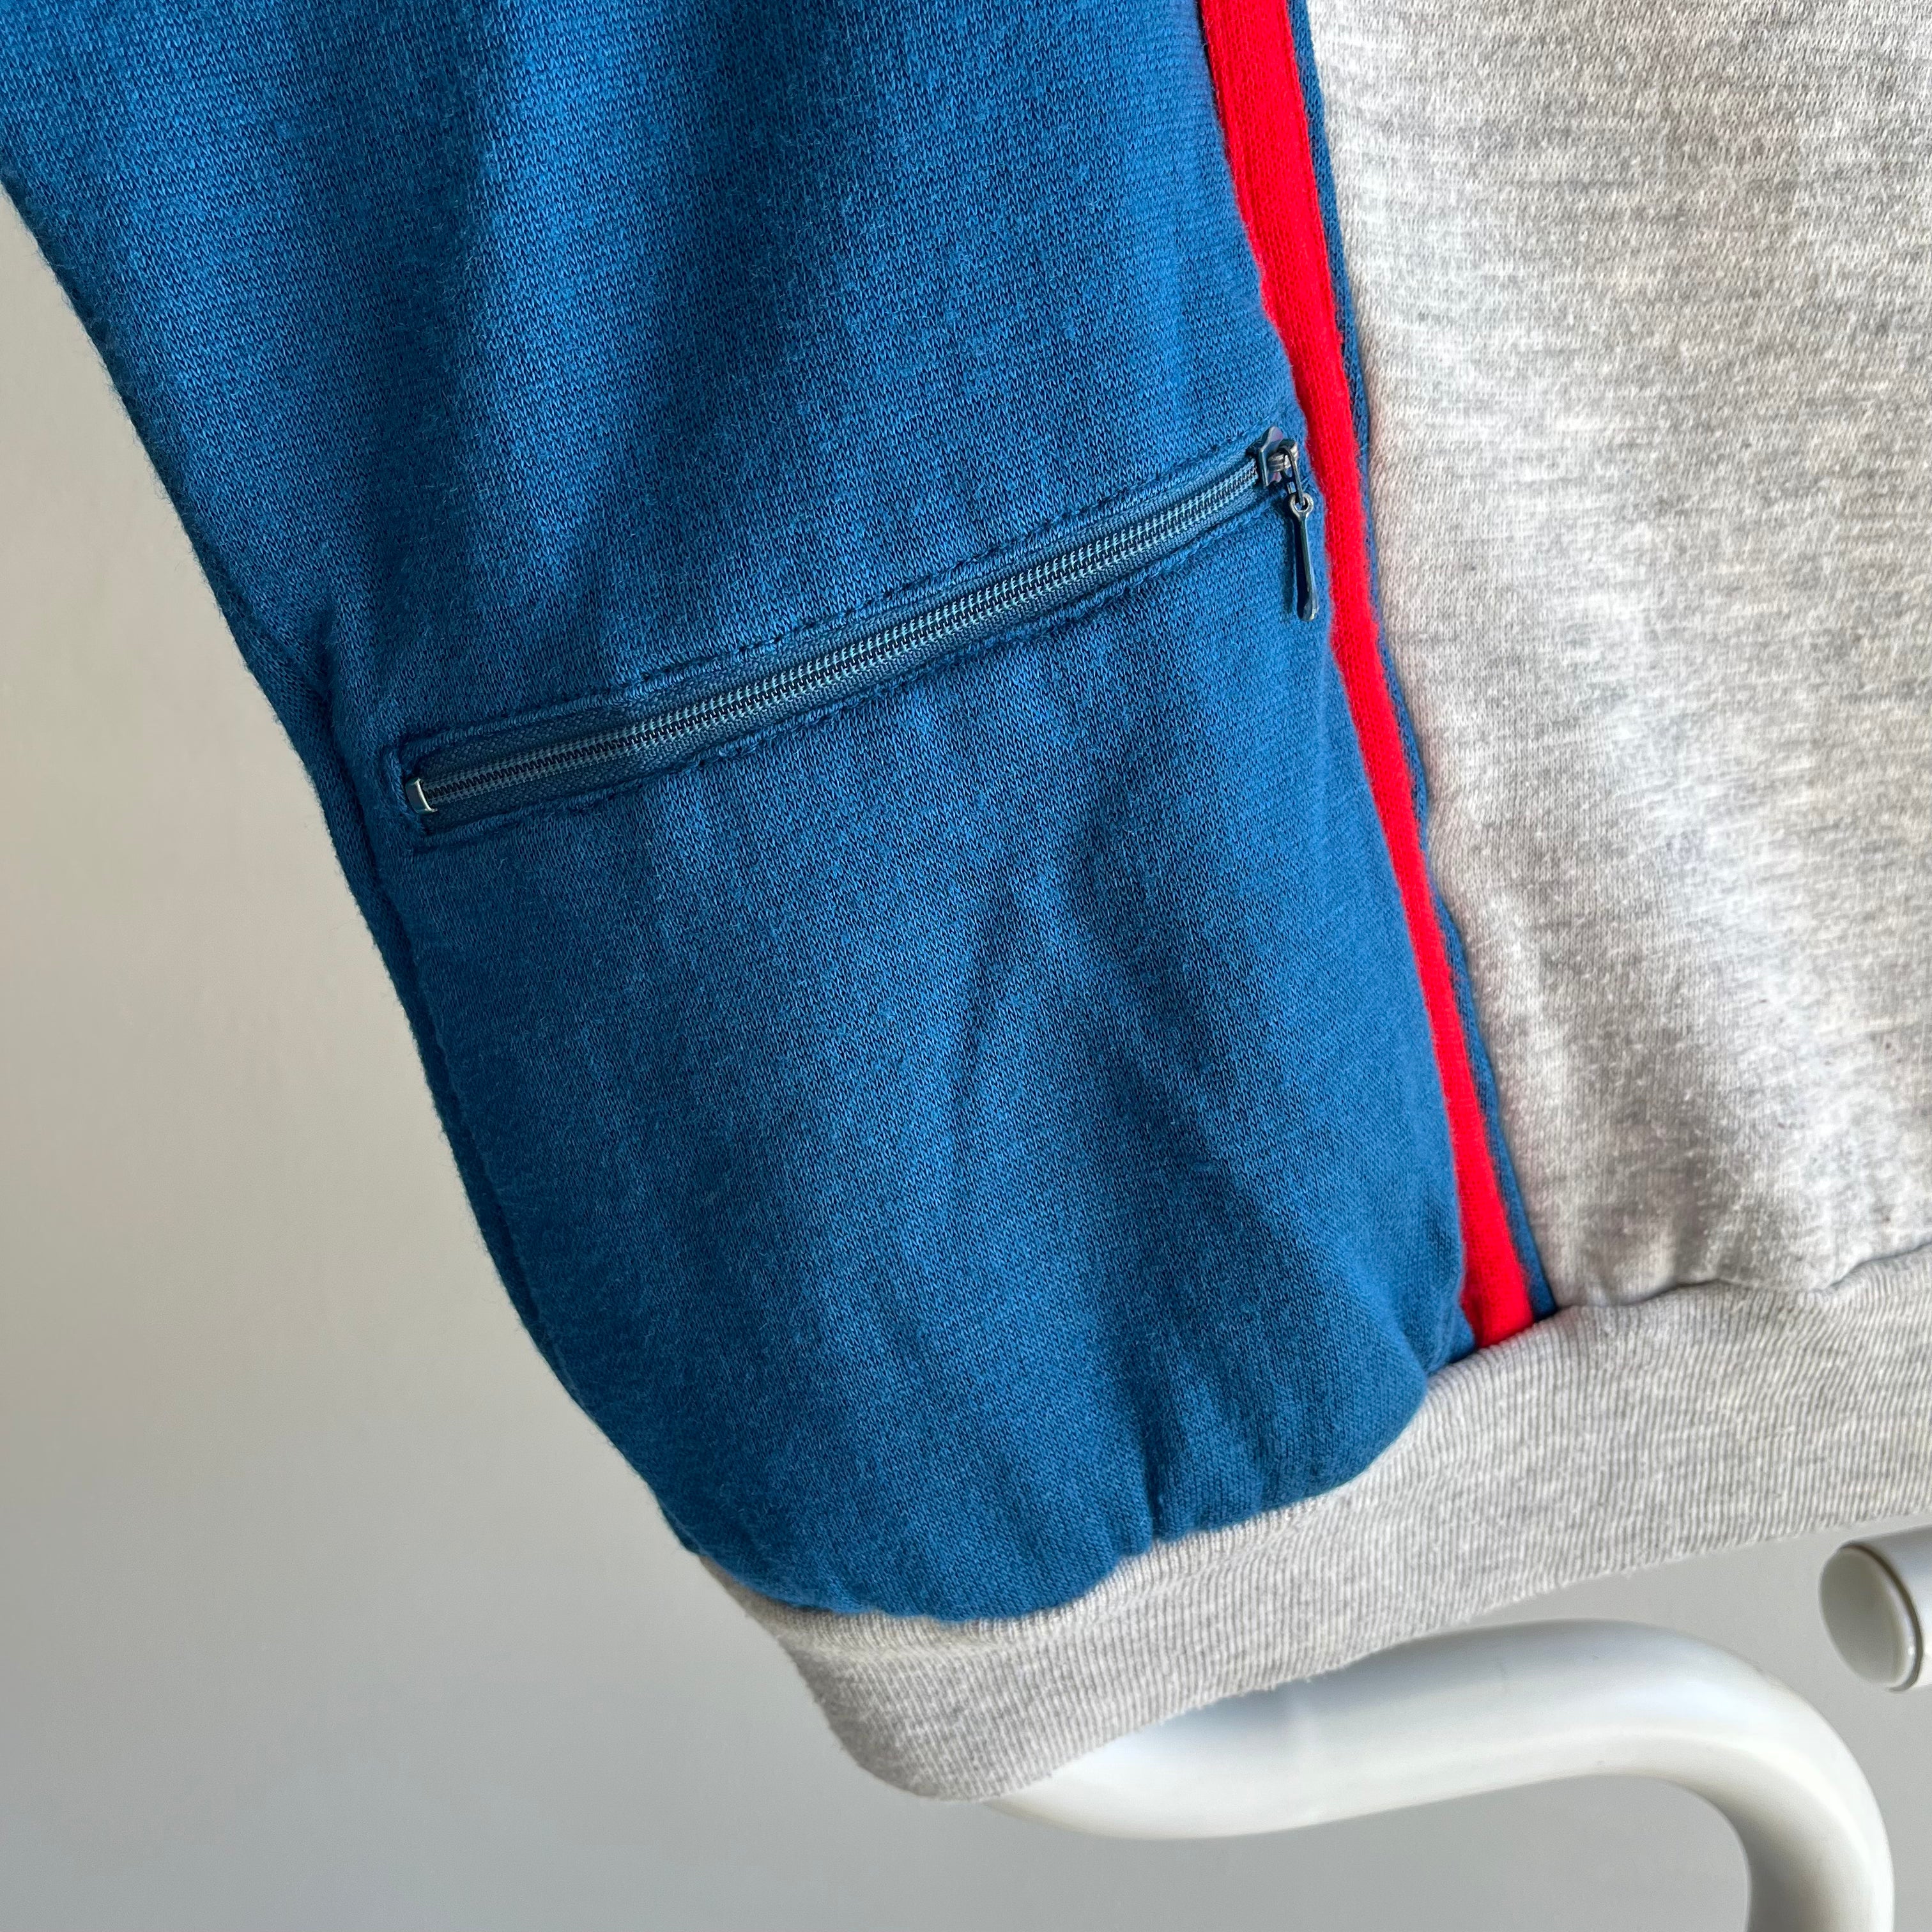 1980s Color Block Red, Gray and Blue Sweatshirt with Zip Pockets